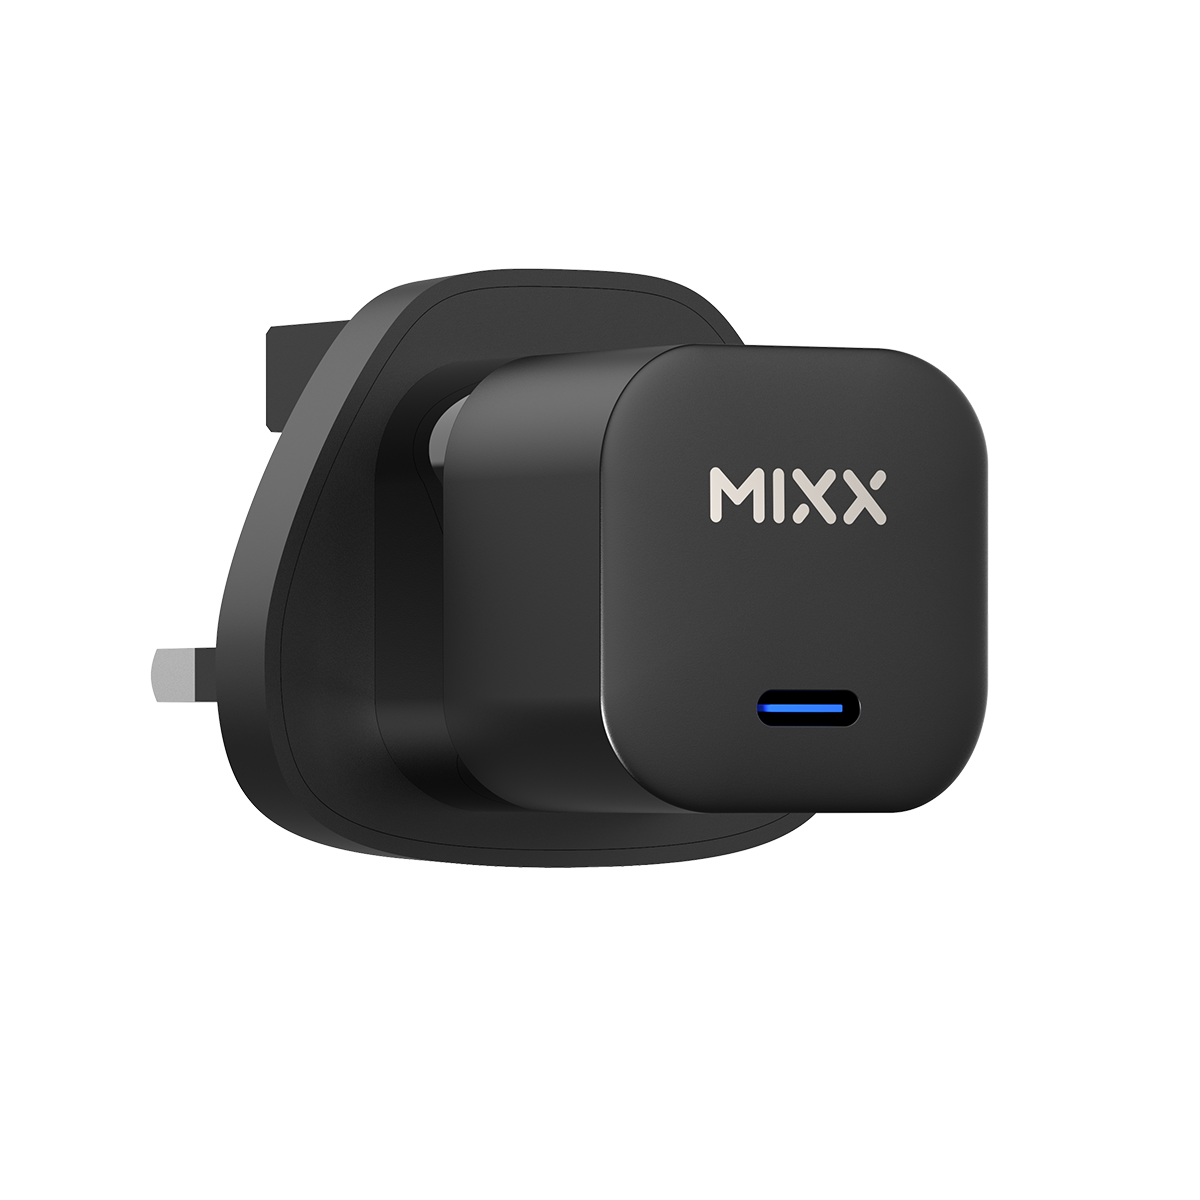 MIXX Single USB C Wall Charger with USB C Cable